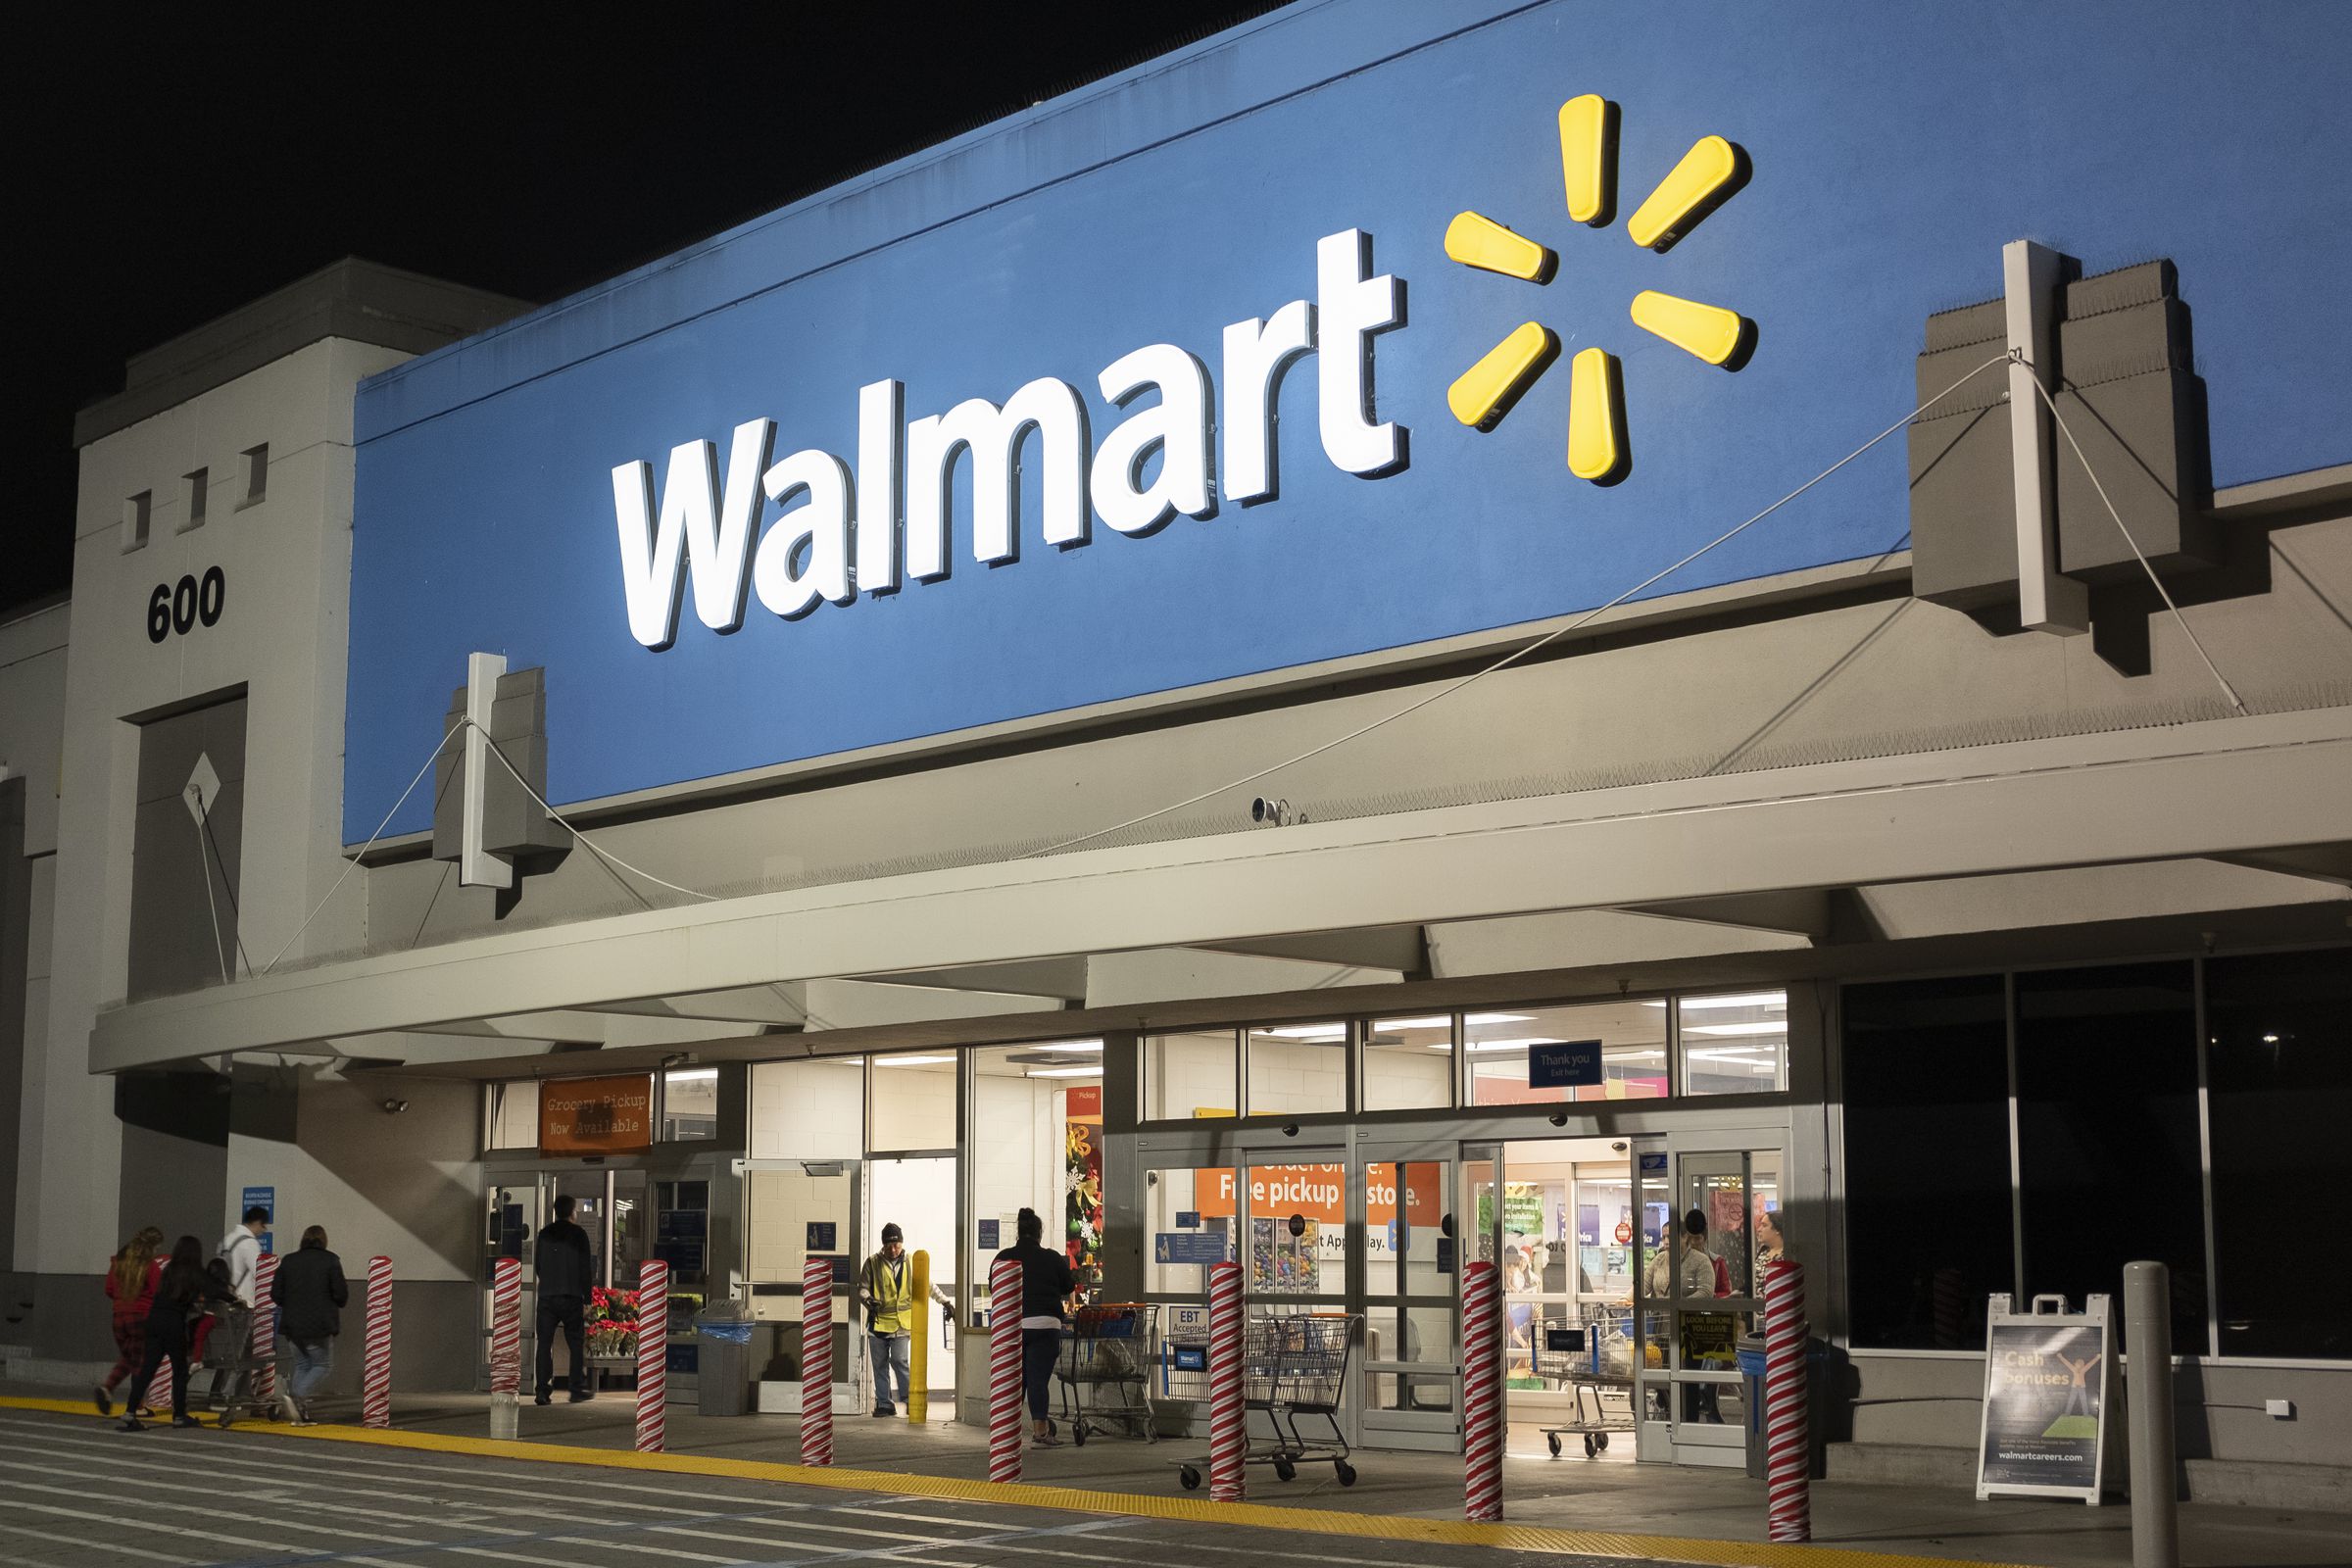 Walmart’s recent trademark applications suggest that it wants to break into the metaverse.